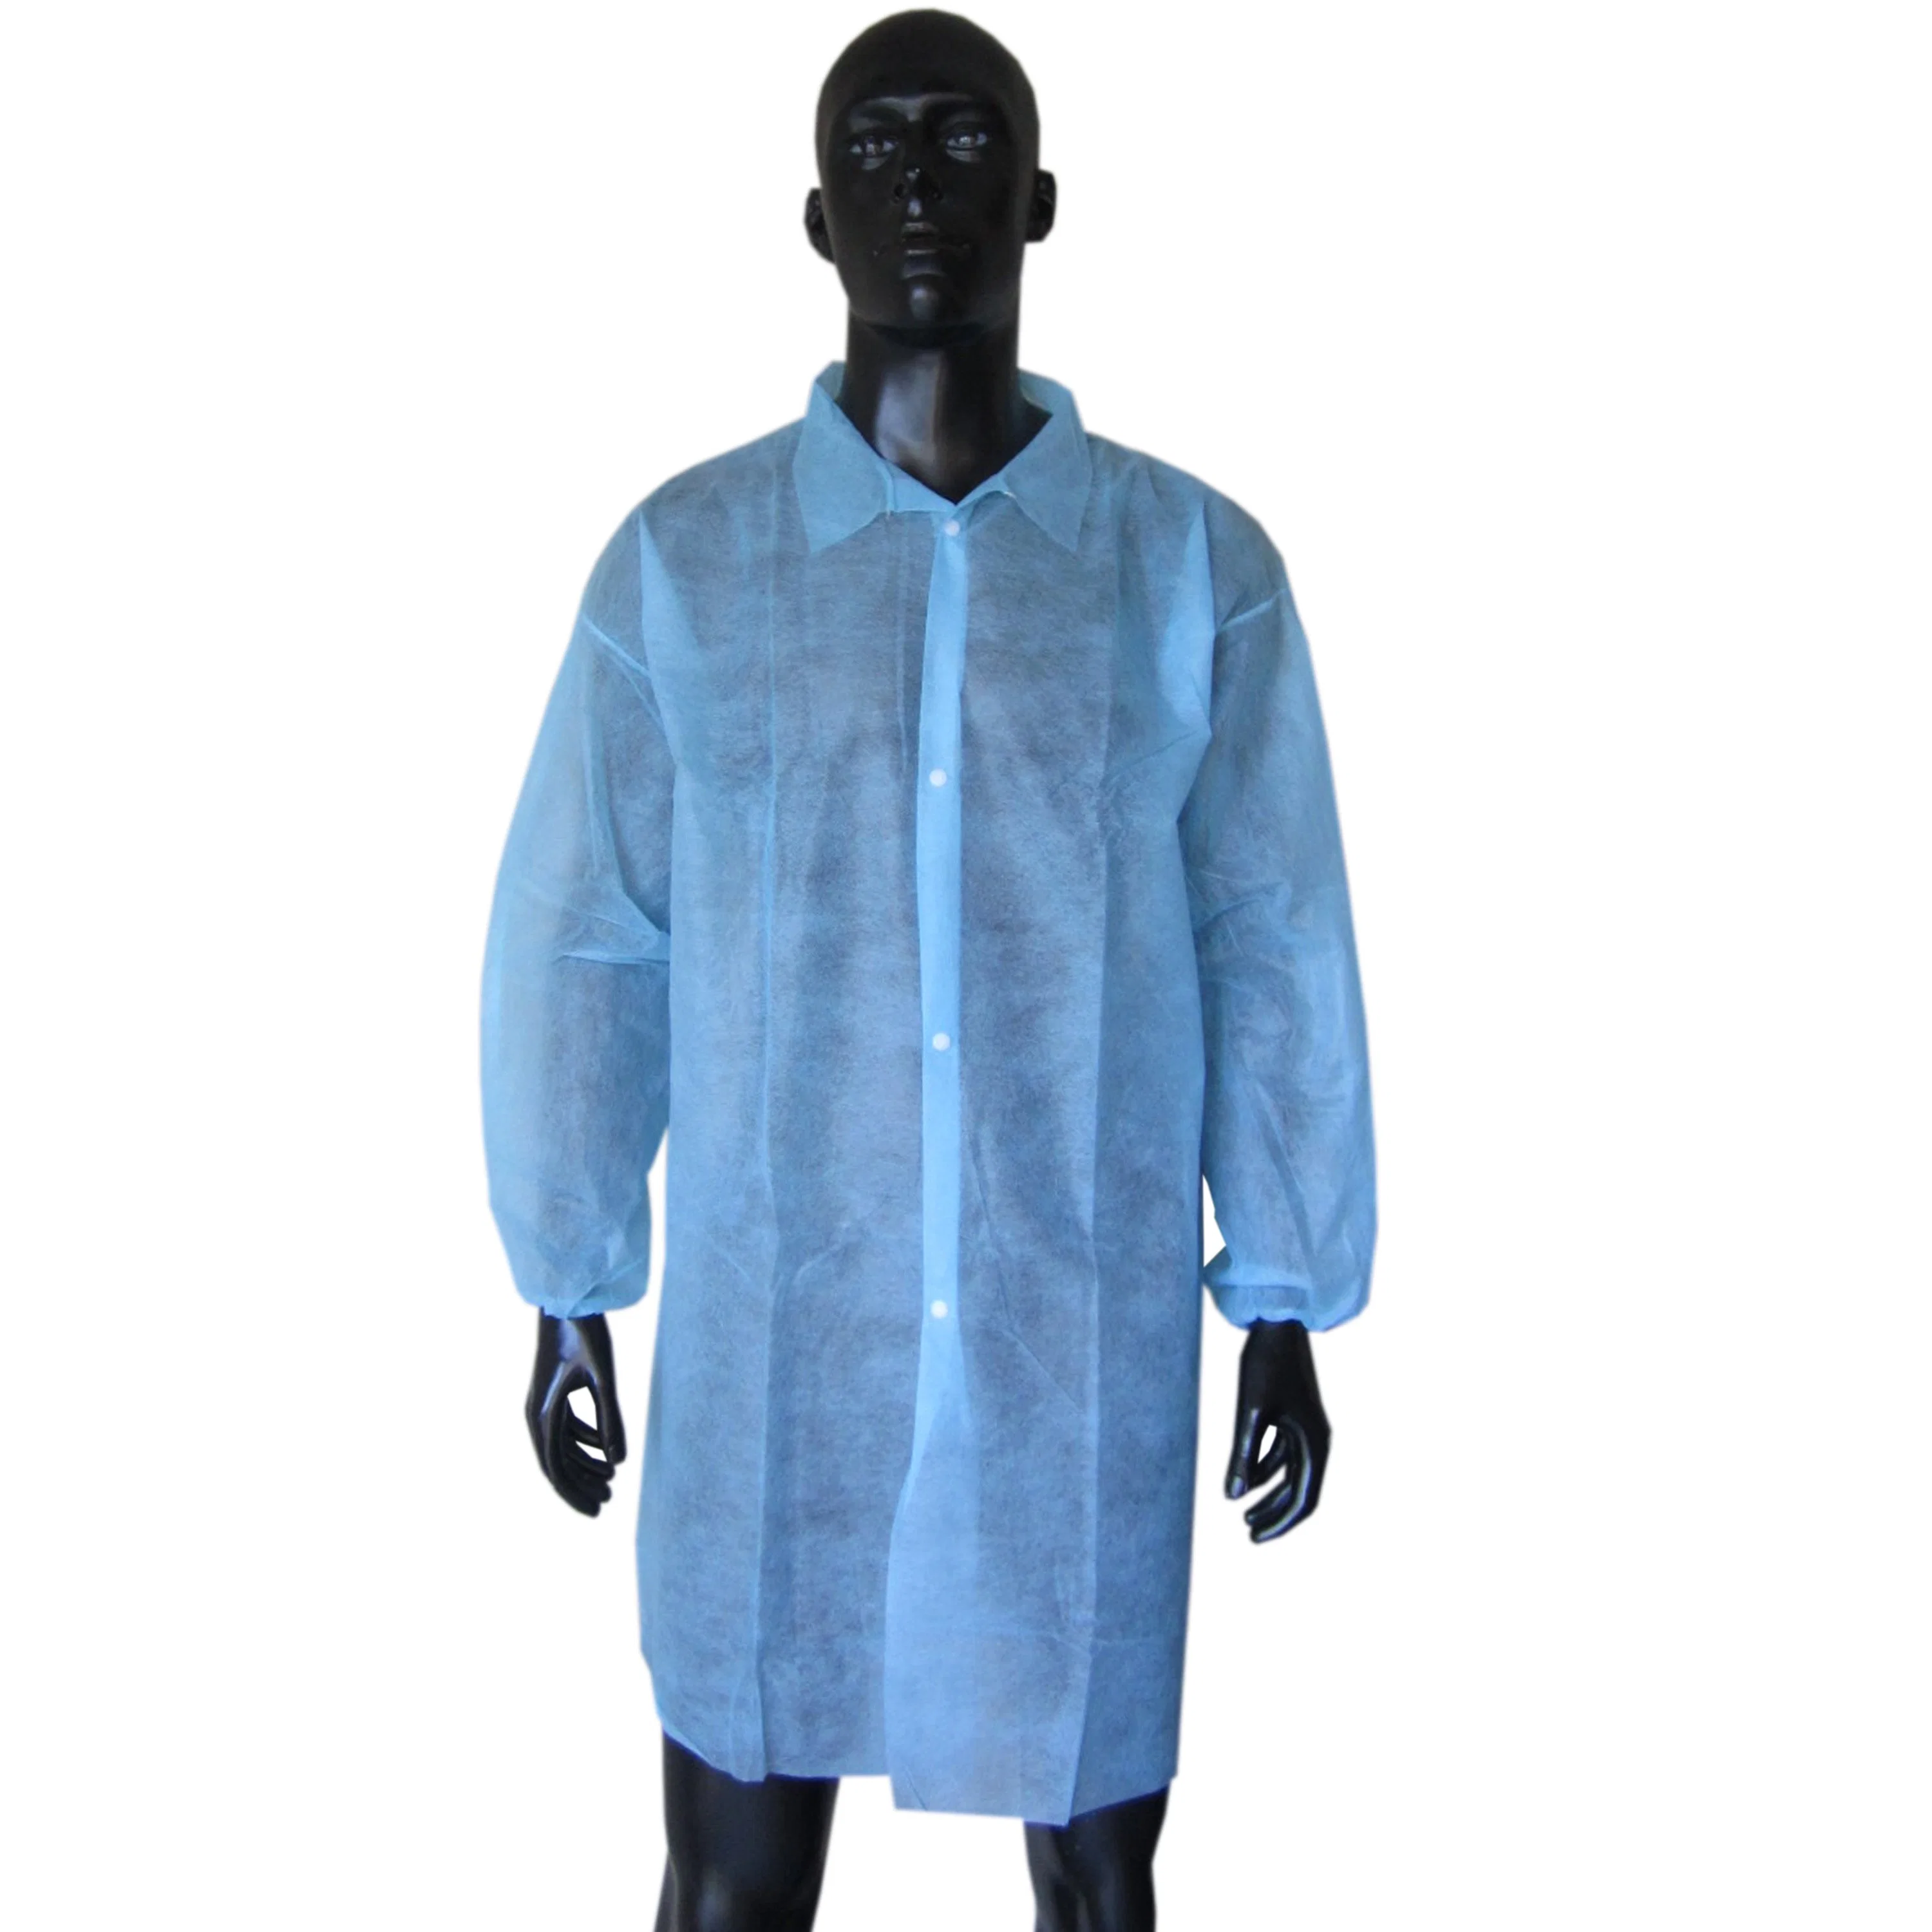 Other Medical Consumables Surgical Coat Disposable Lab Coats